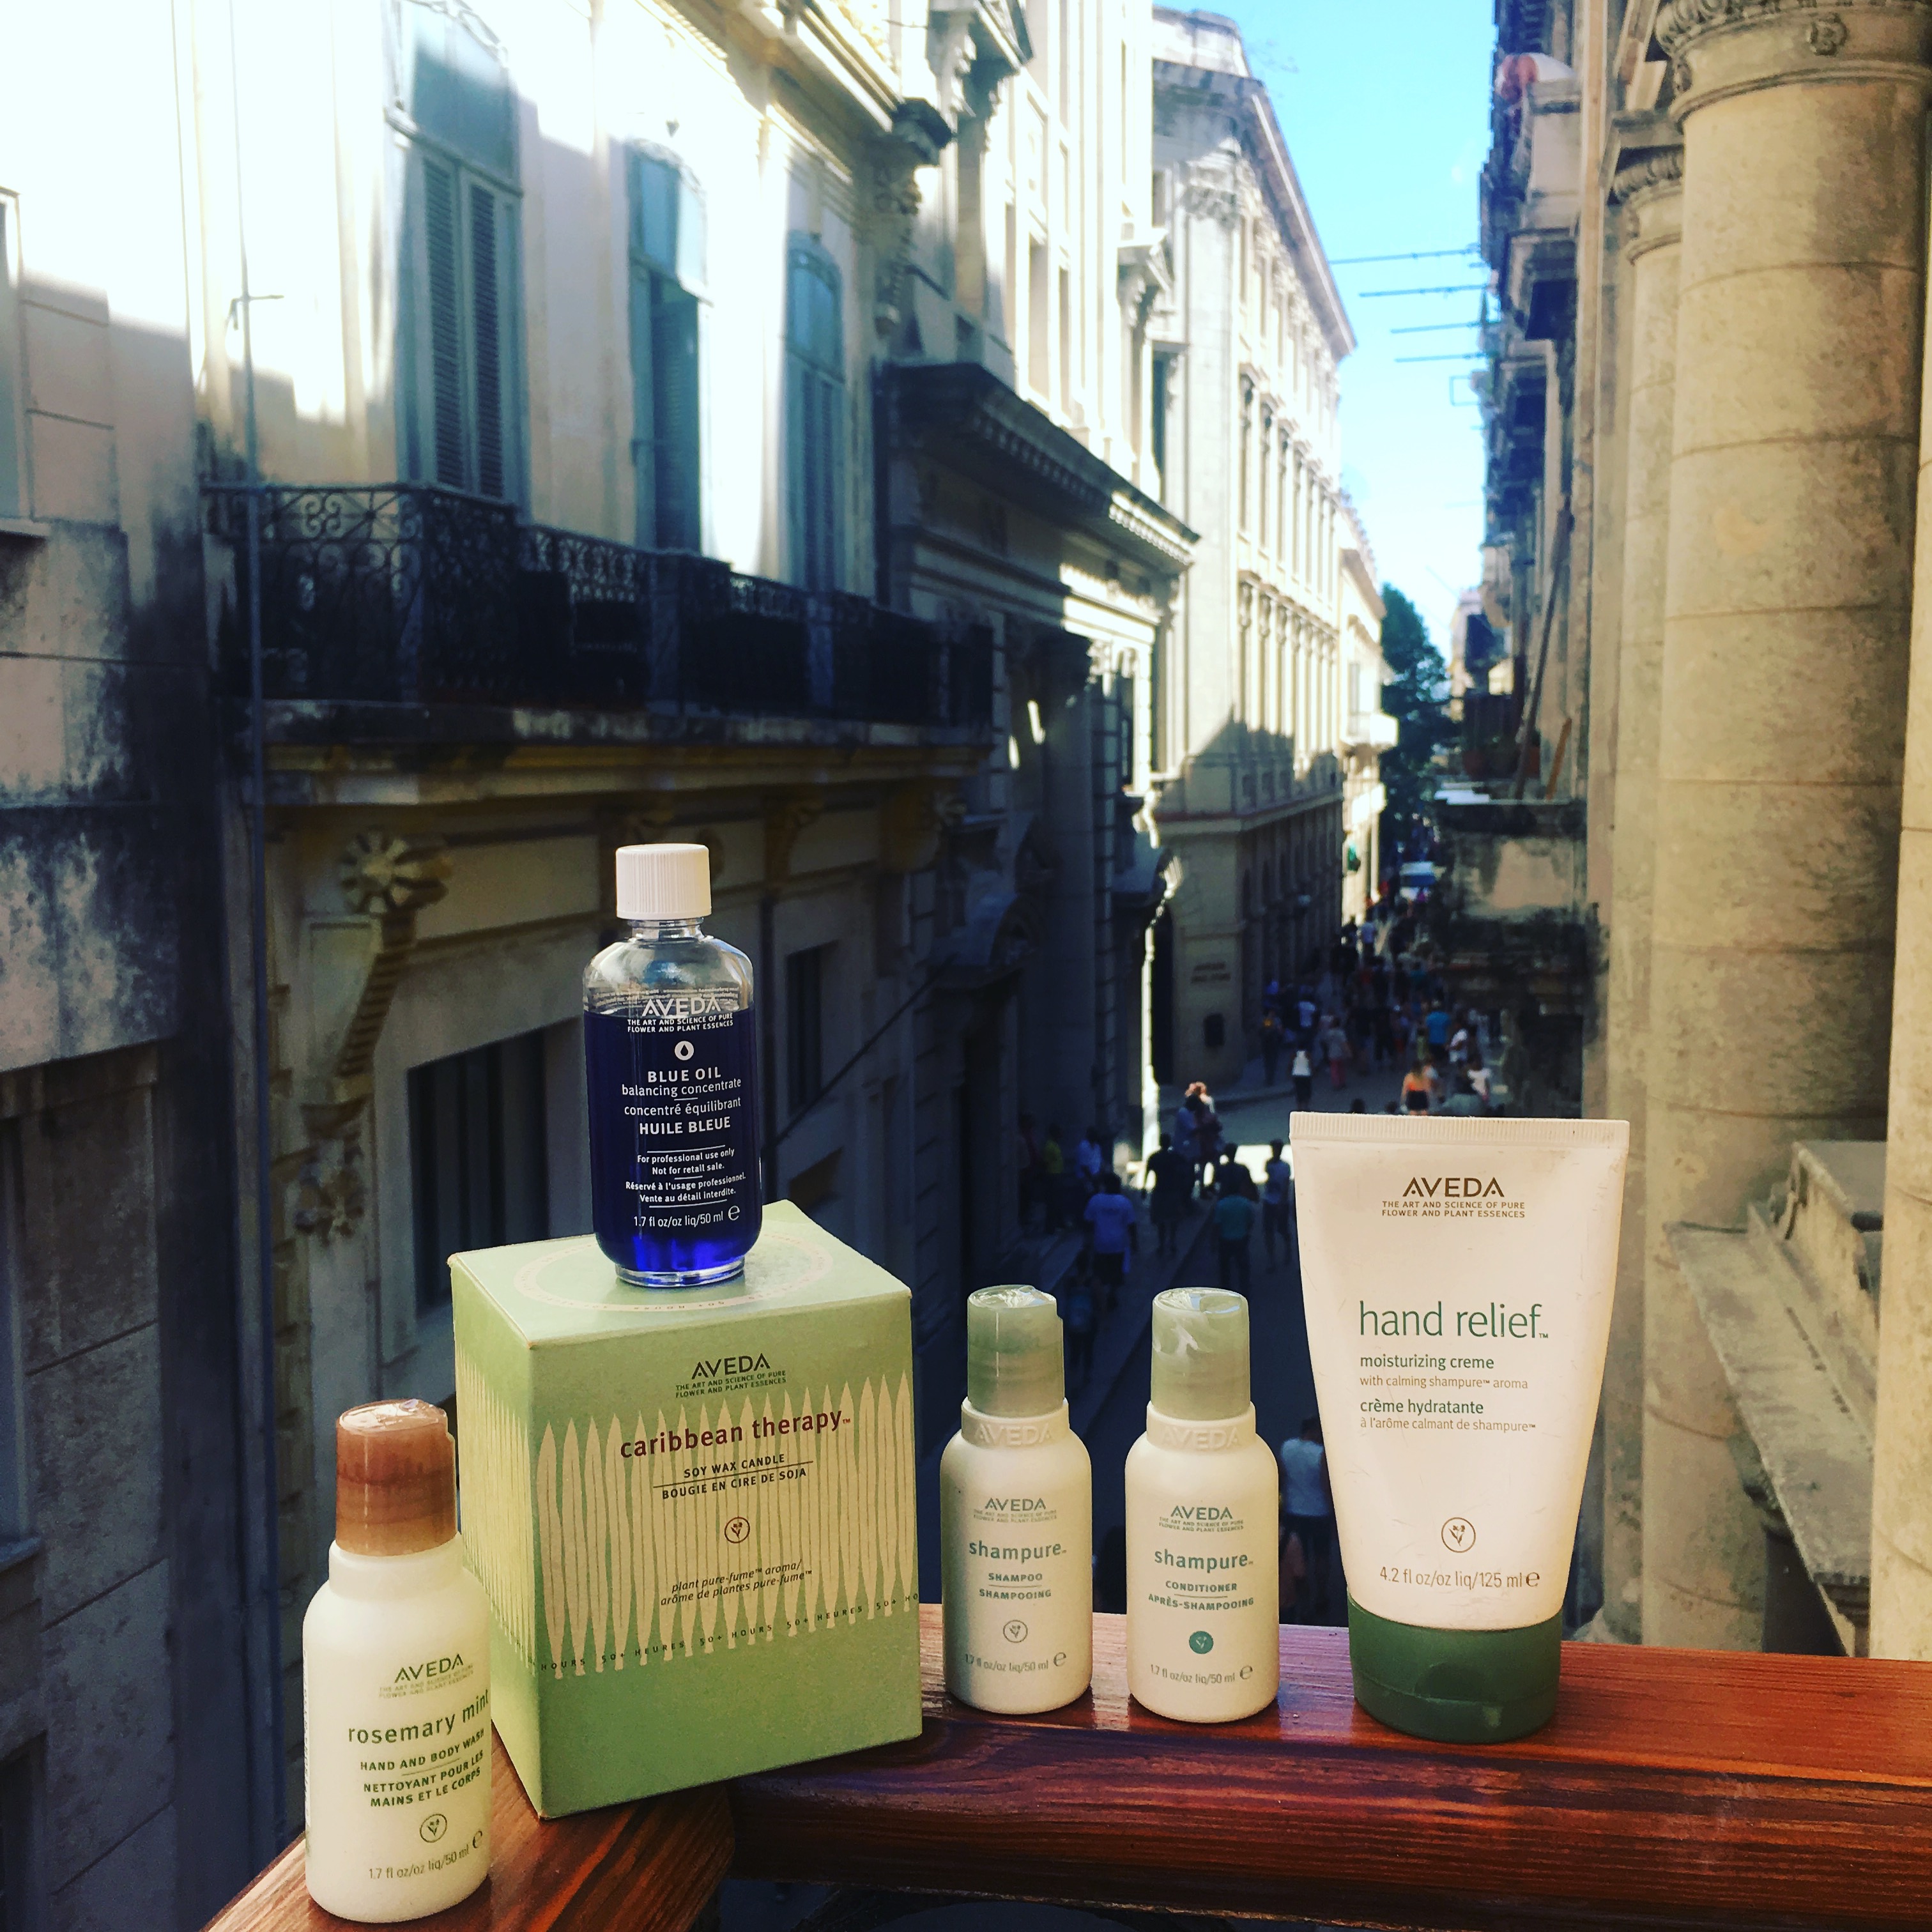 Aveda Products Luisa donated to the Spa Owners, School Directors and the children in Old Havana, Cuba